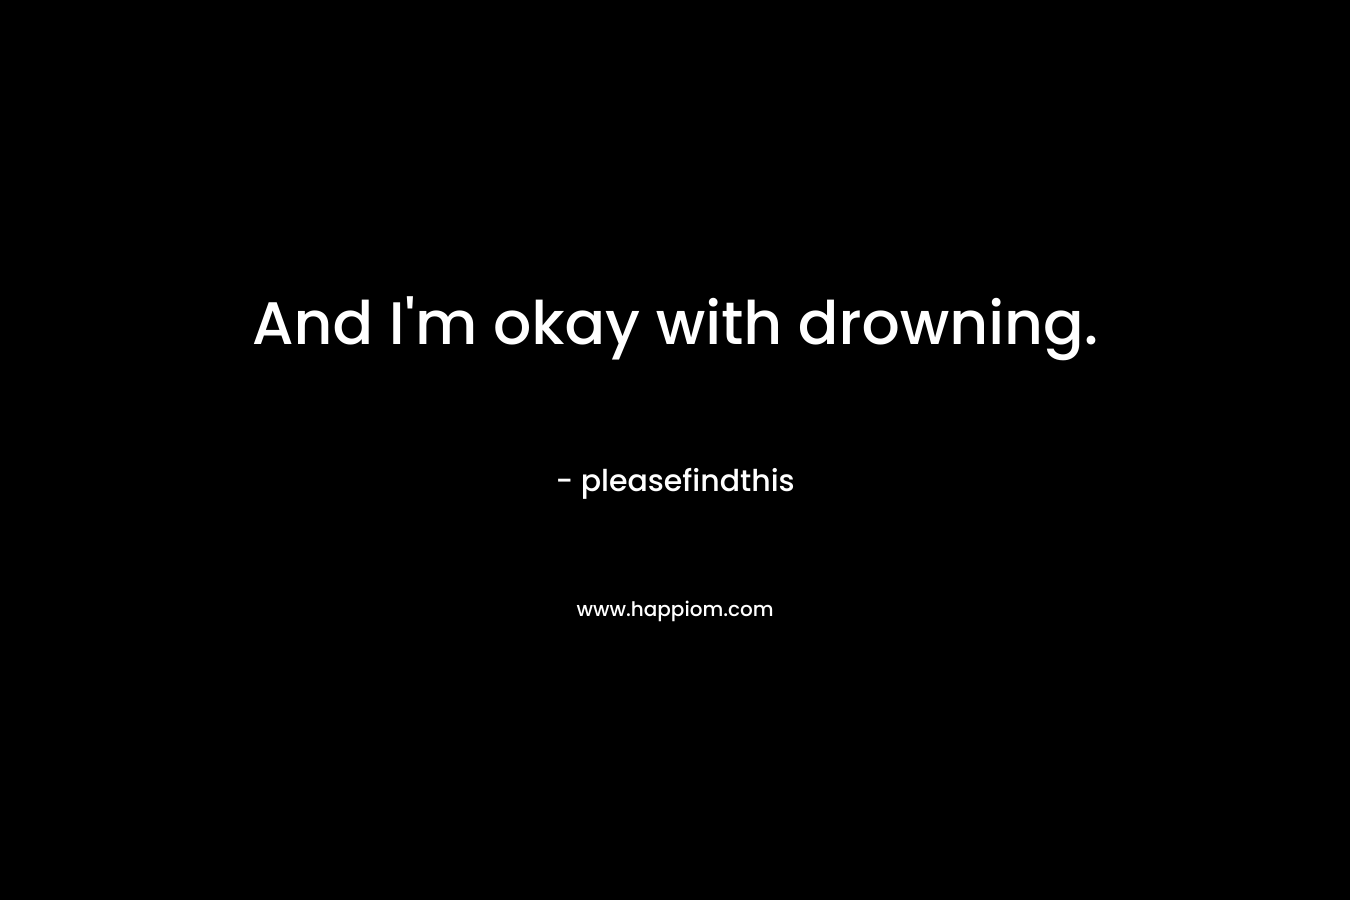 And I’m okay with drowning. – pleasefindthis